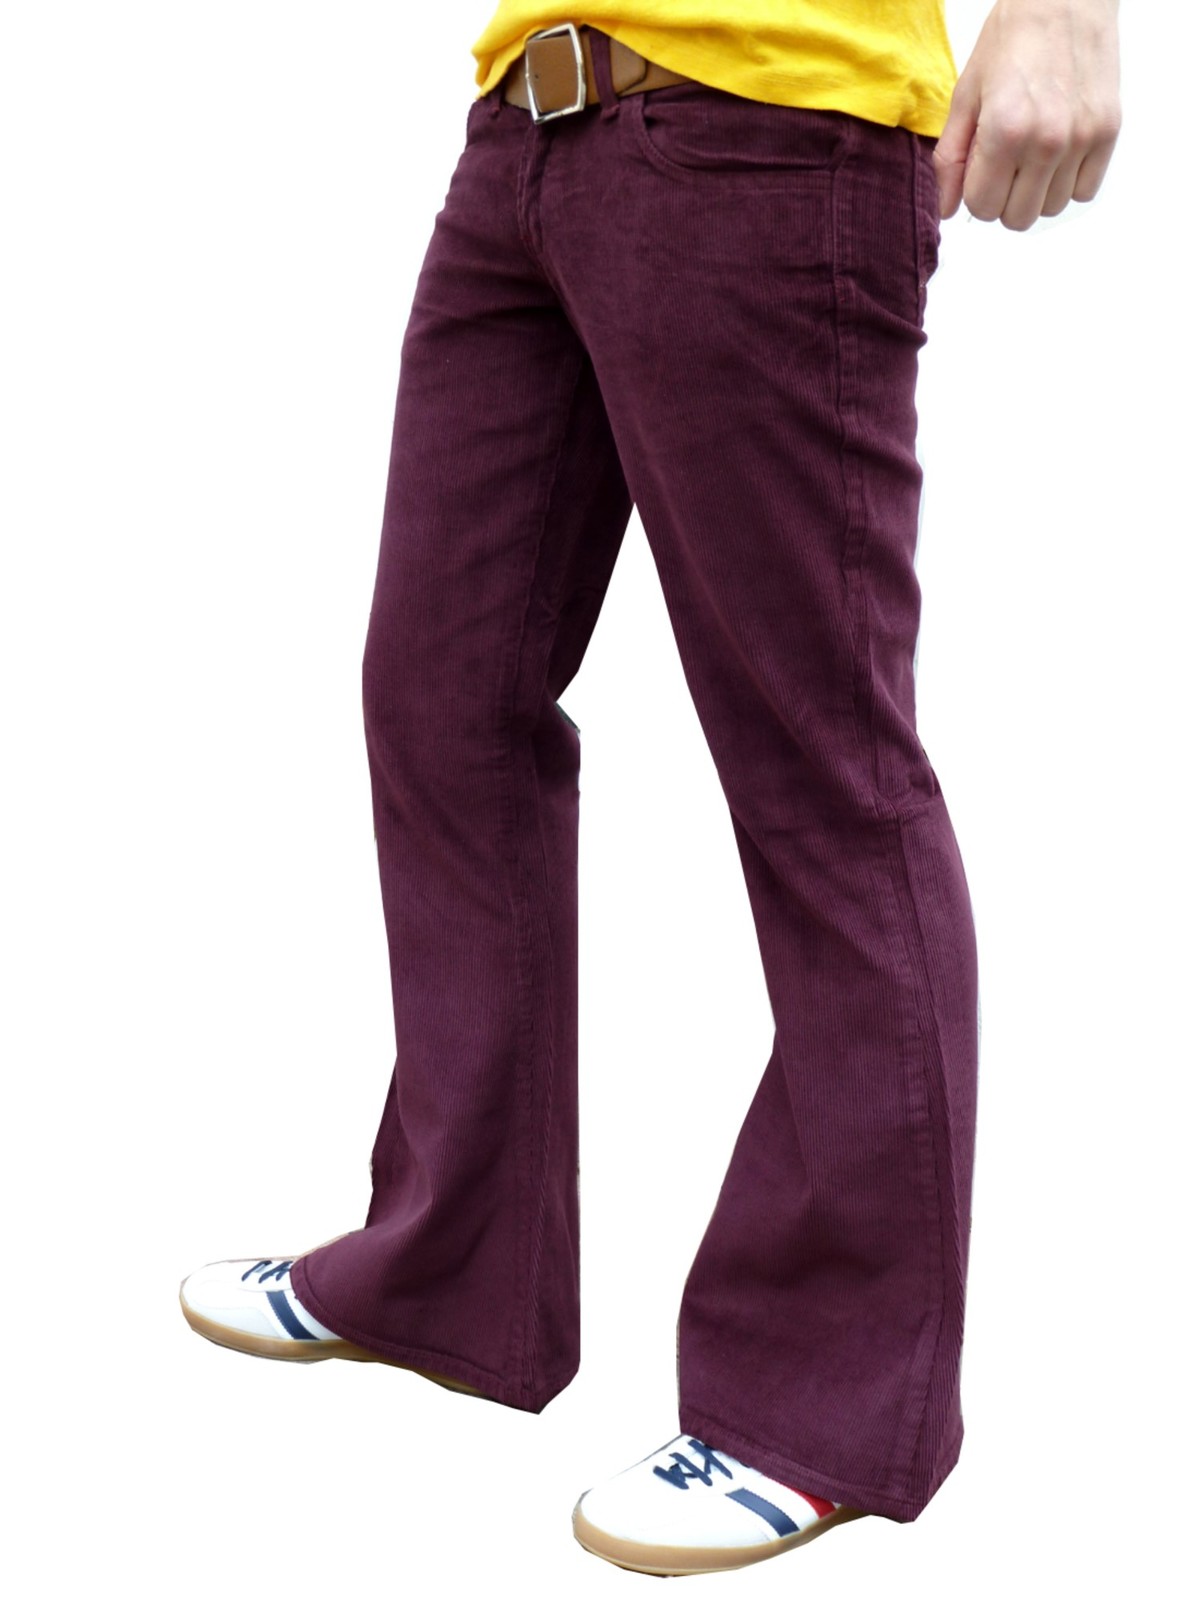 Mens Flares Burgundy Red Corduroy Flared Bell Bottoms Pants Hippie ...